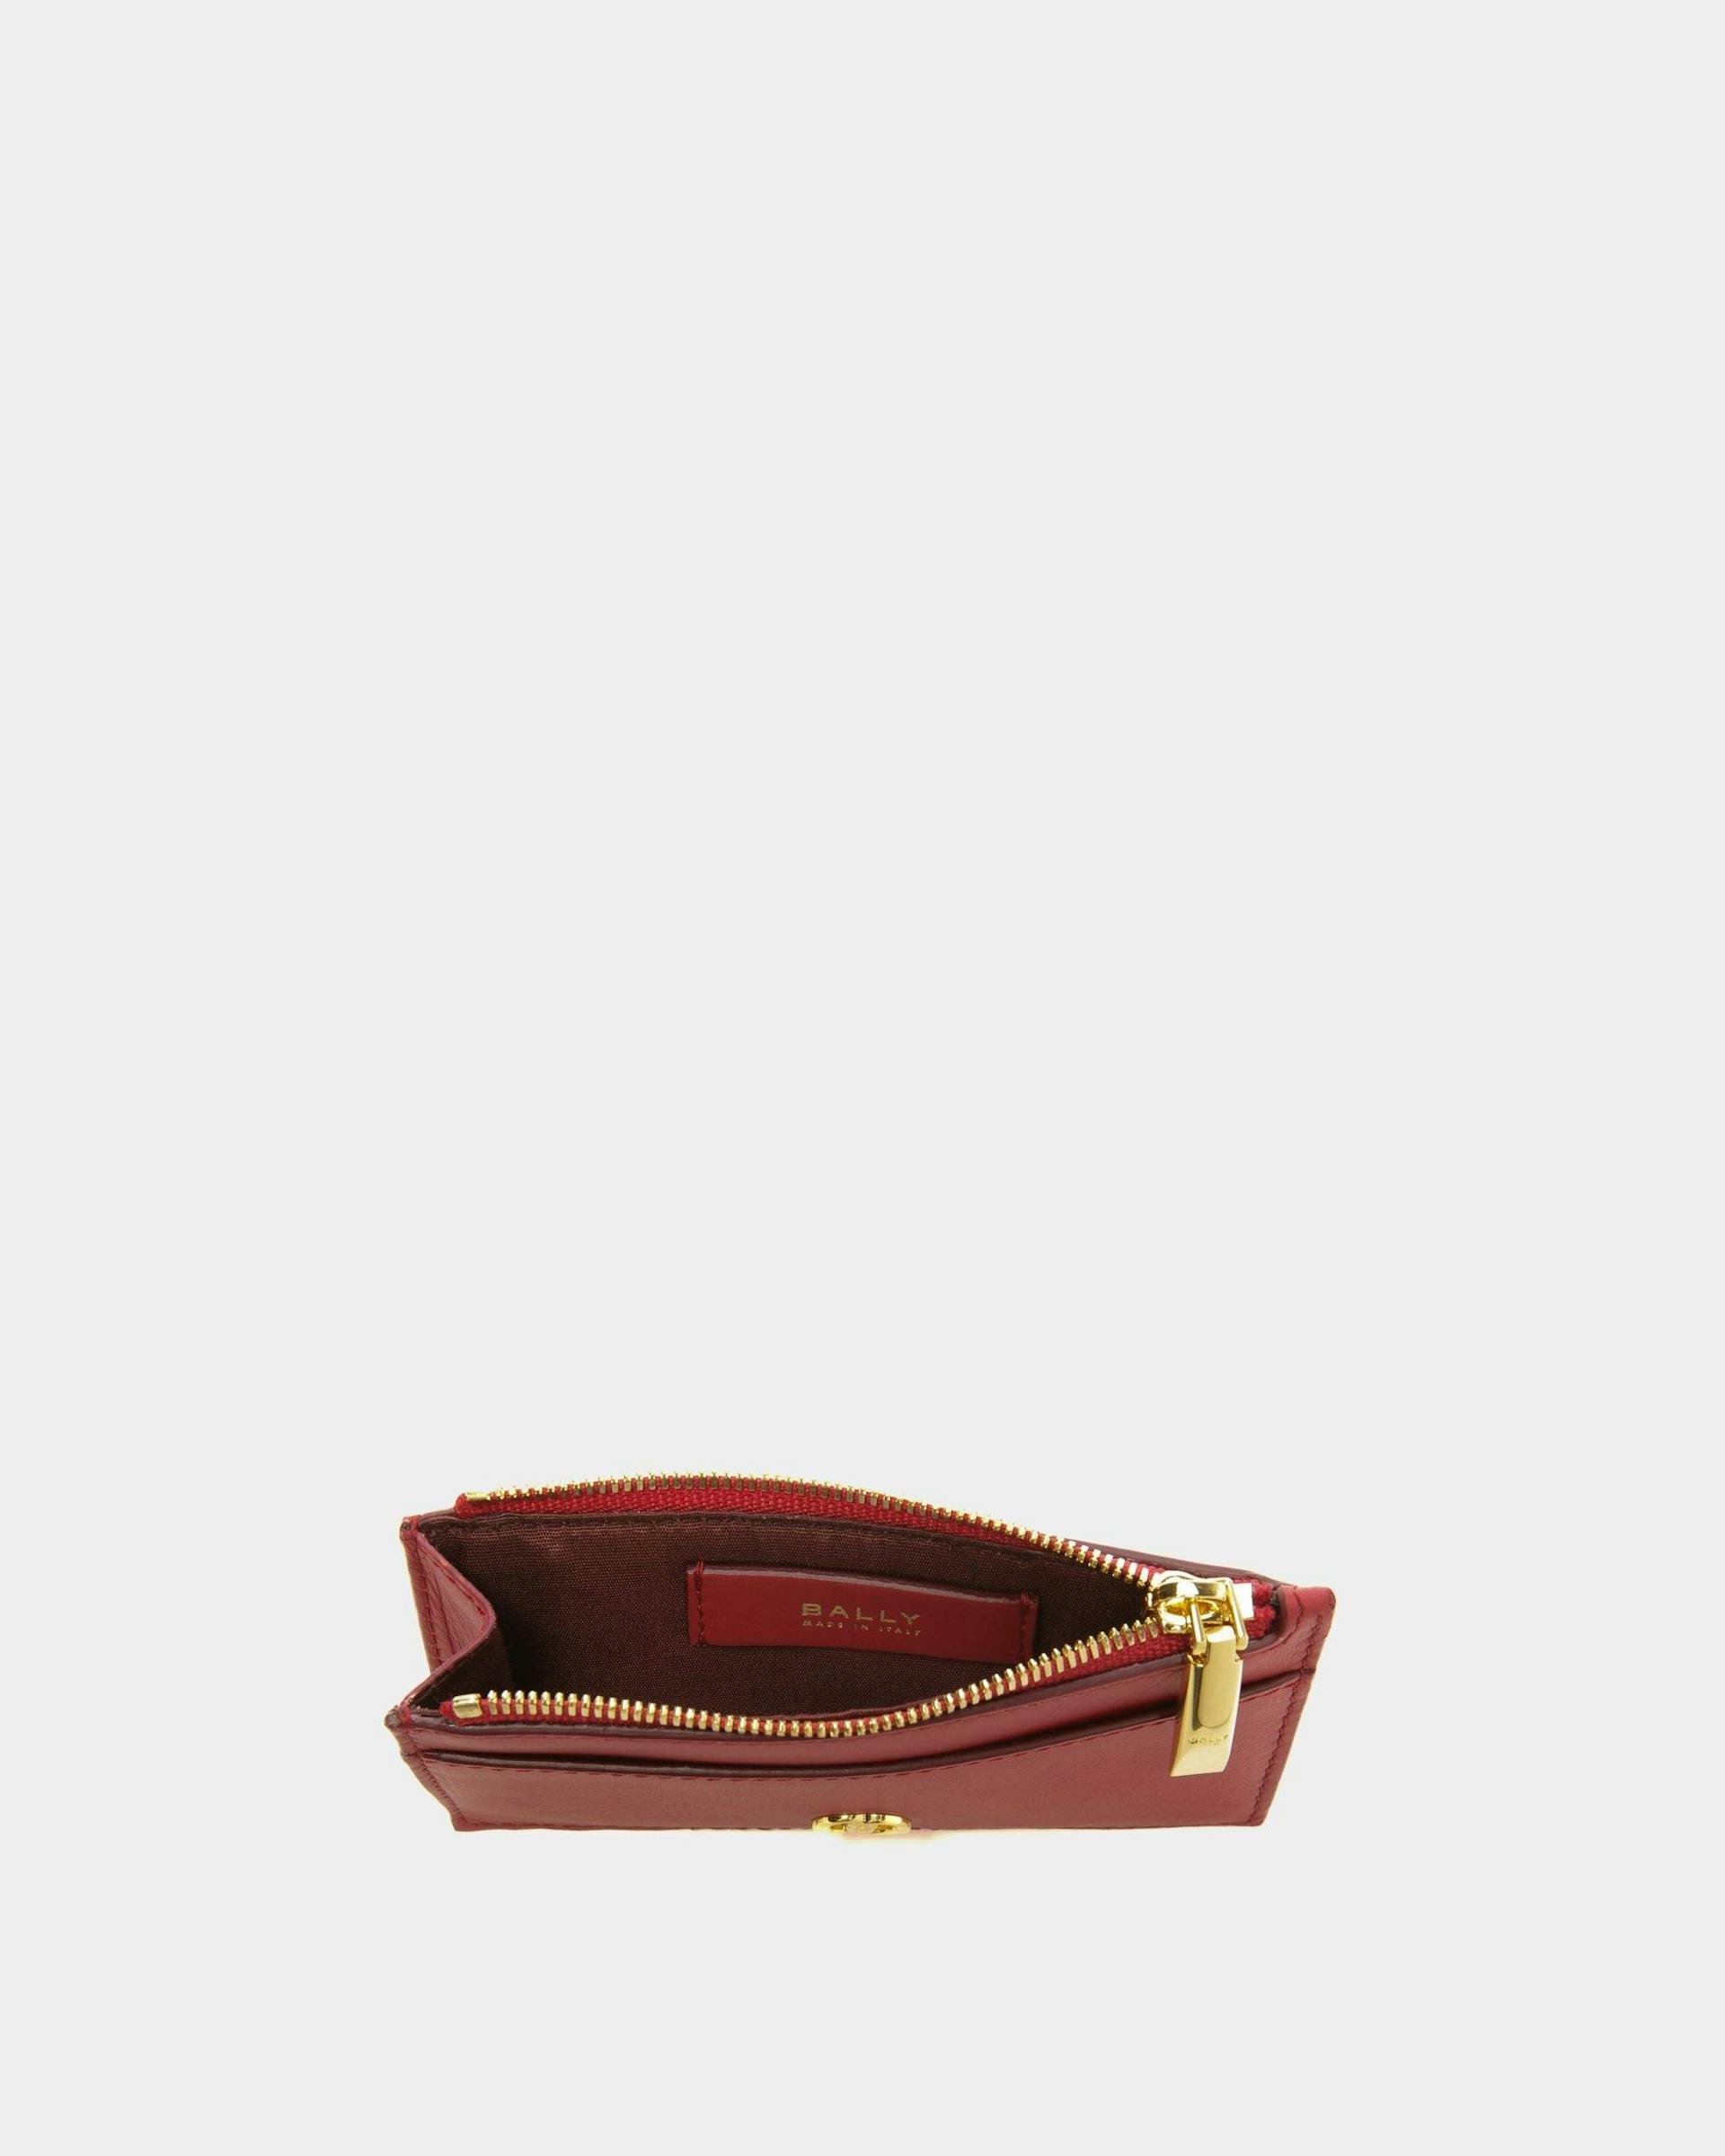 Emblem Business Card Holder In Deep Ruby Leather - Women's - Bally - 03